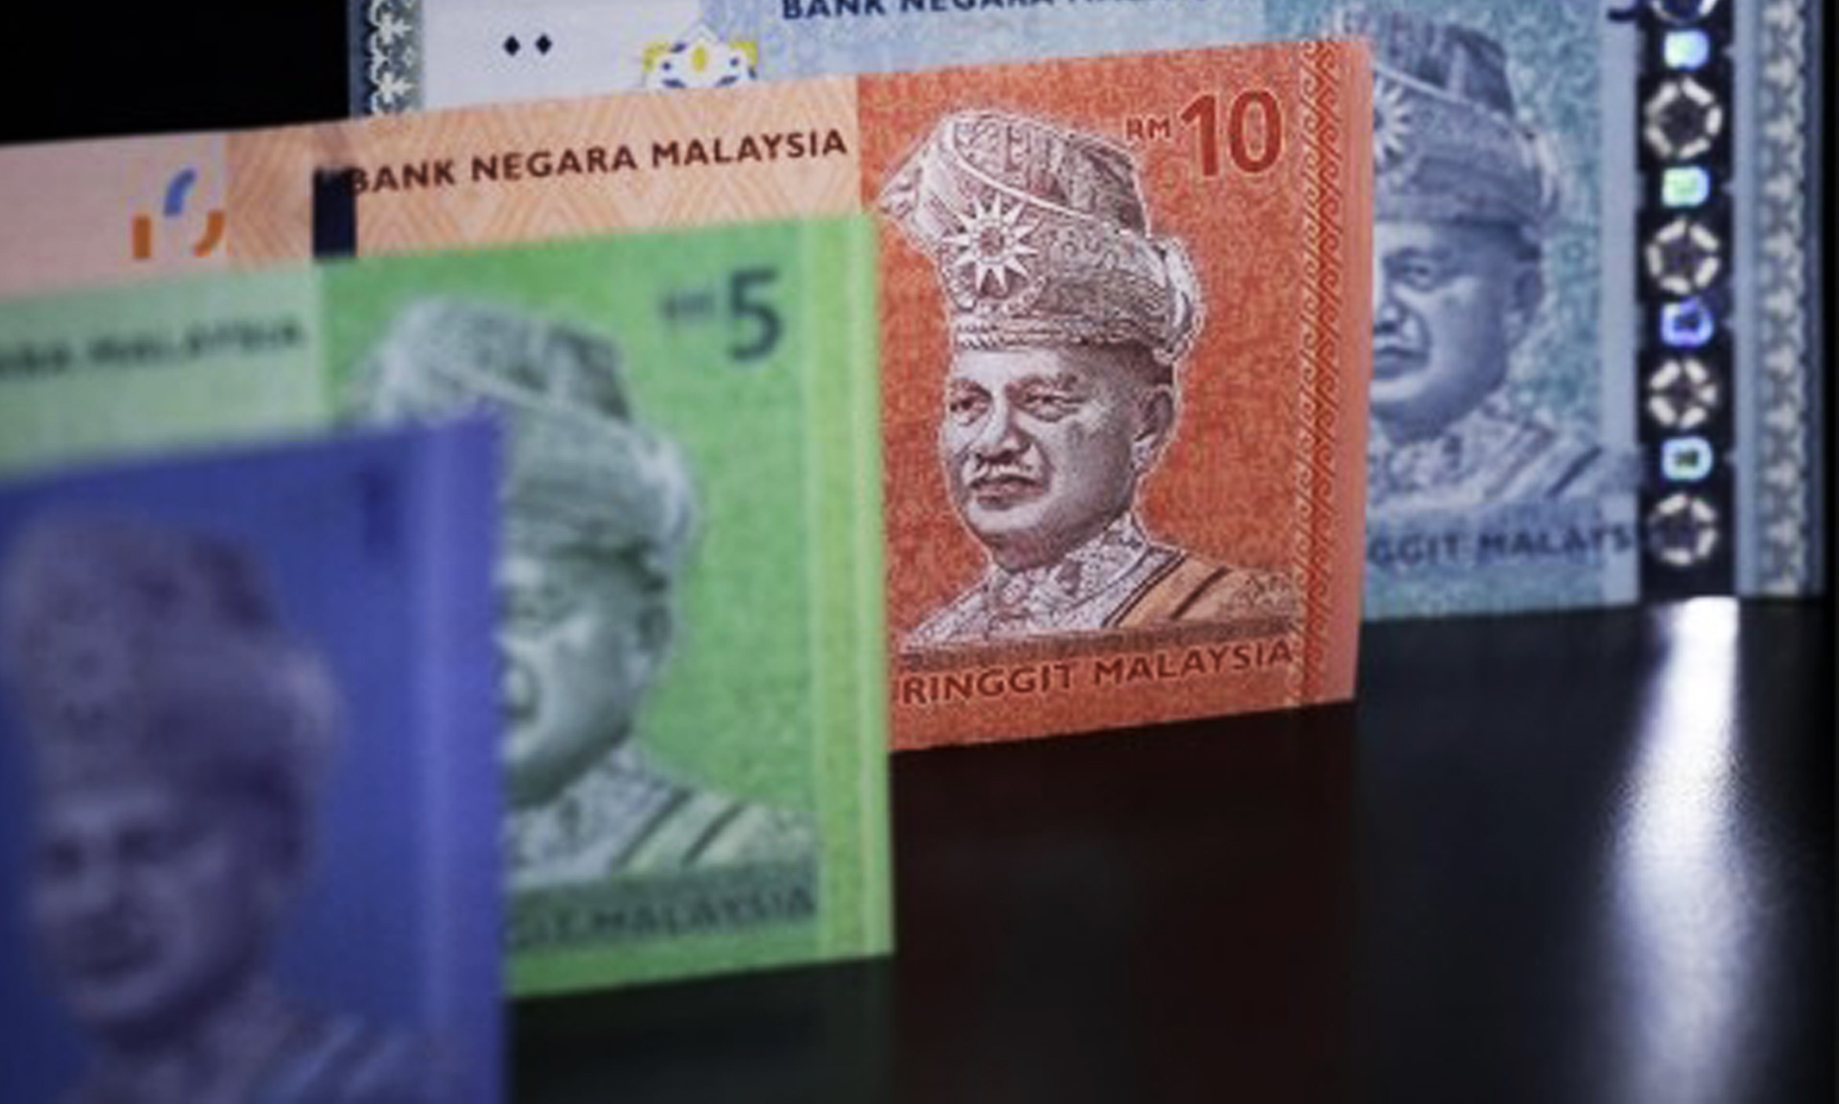 Malaysia’s Central Bank’s International Reserves at US$104.8 Bln as at Sept 15, 2020